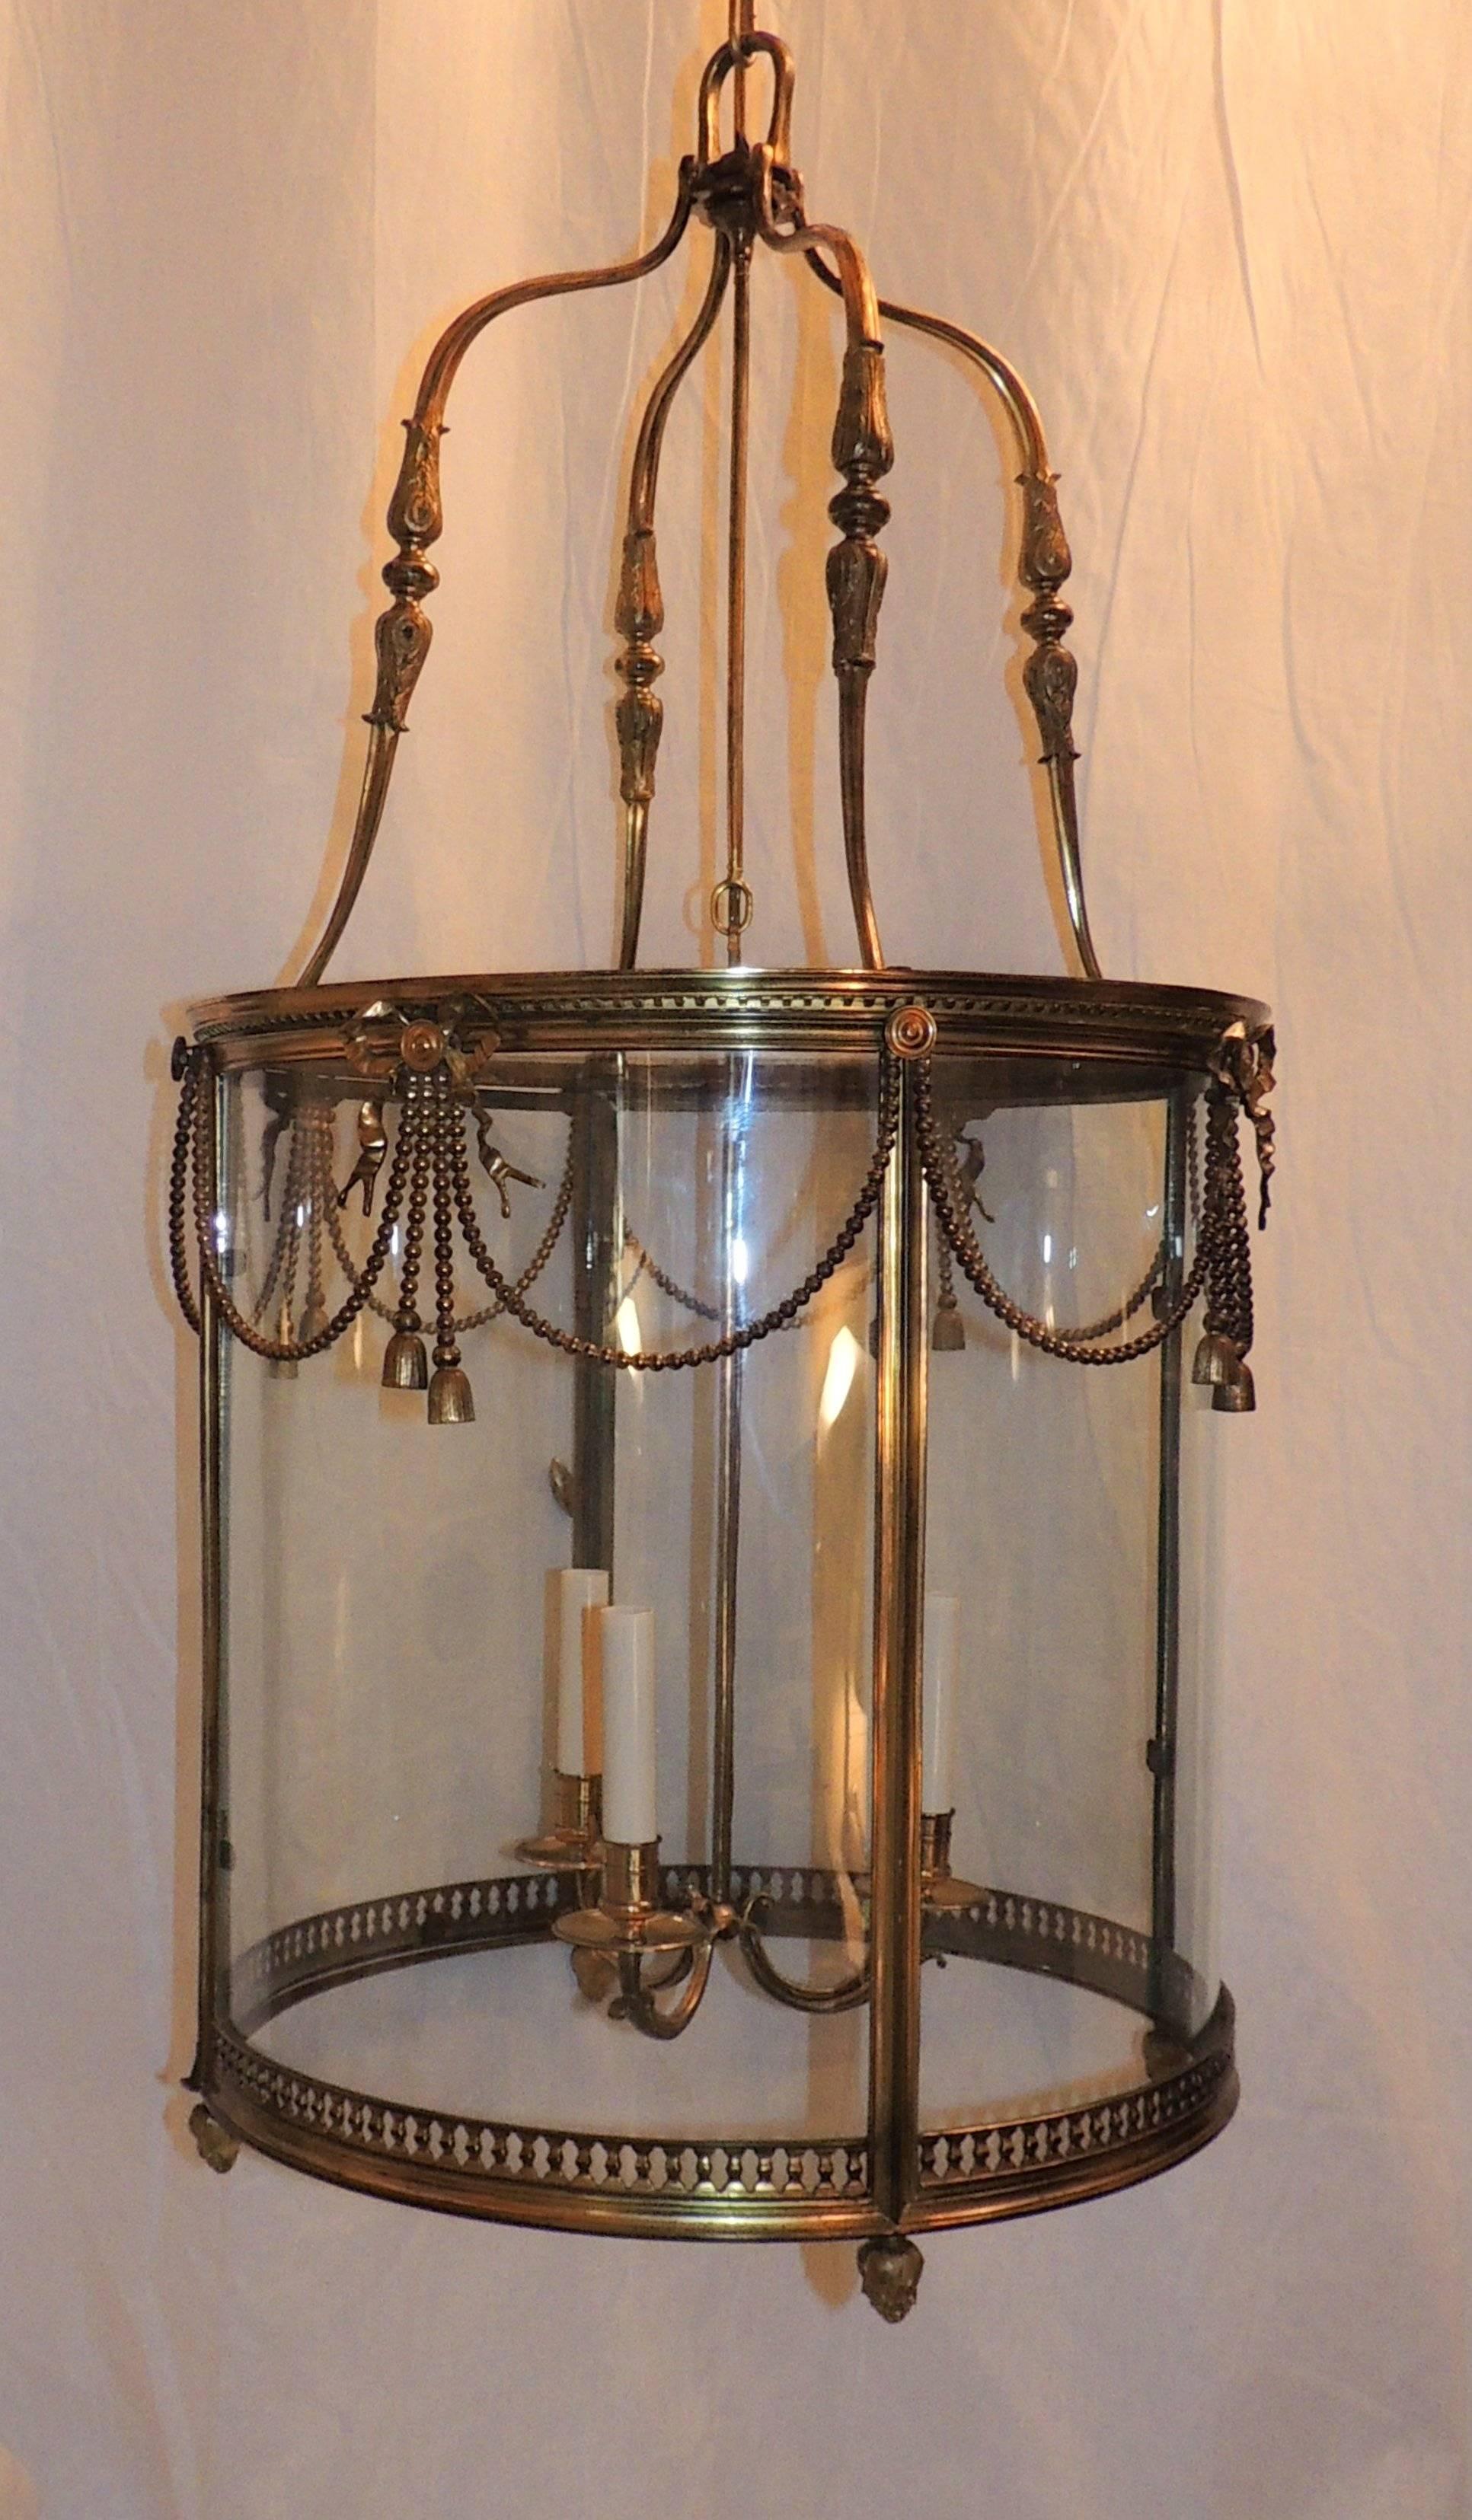 Exquisite French Louis XVI style gilt bronze three-light lantern fixture adorned with bronze beaded swags and finished with a center medallion of a bow.

Measures: 36